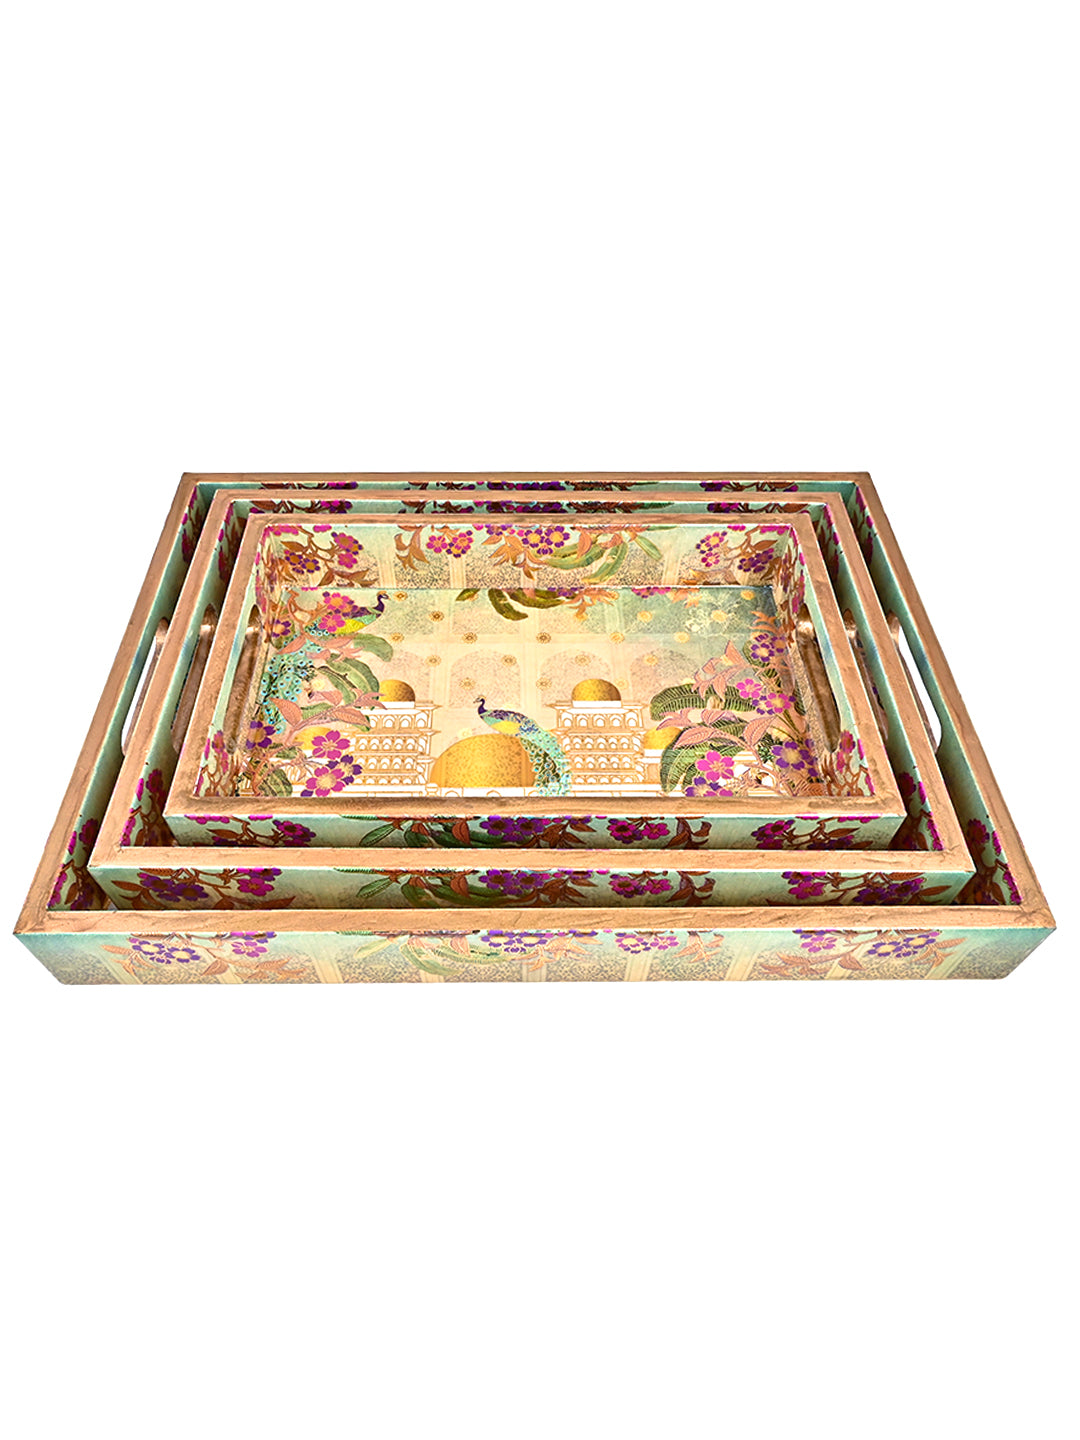 Mahal With Peacock Tray Set Of 3